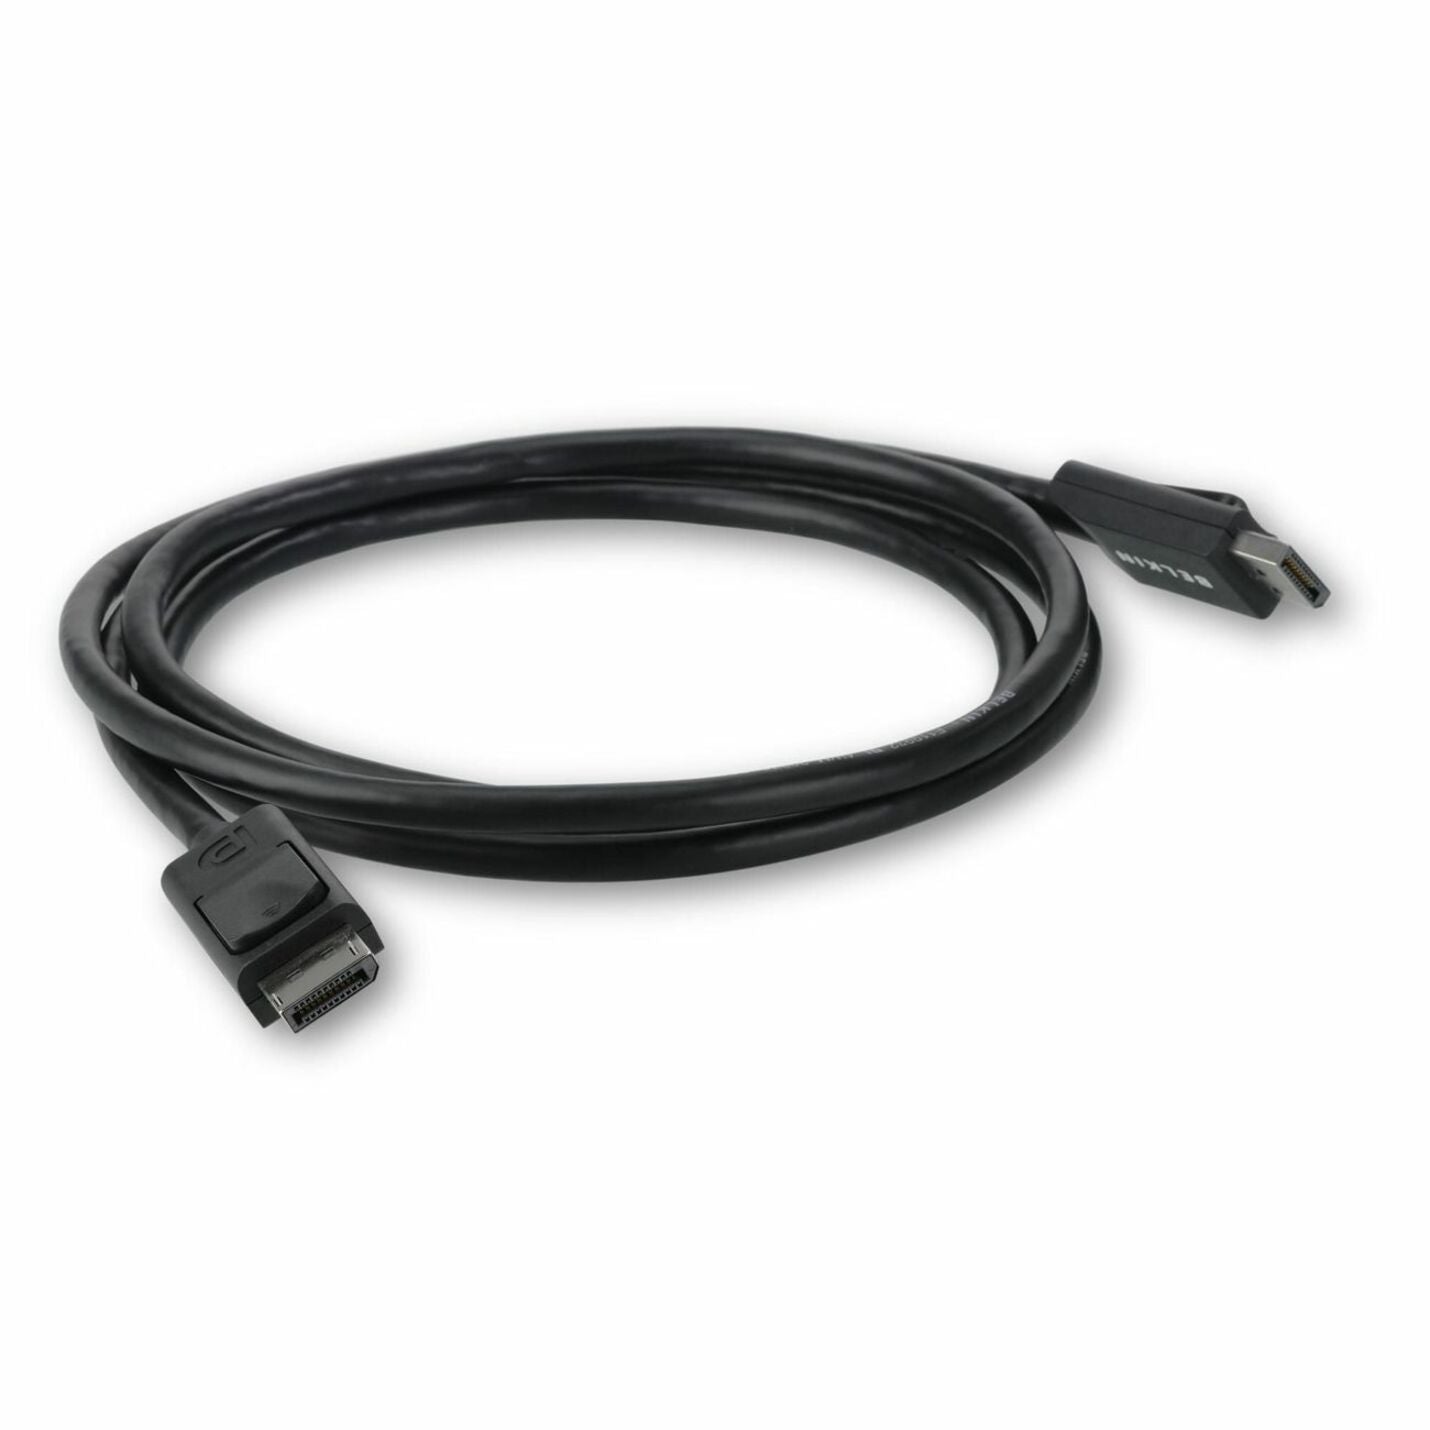 Belkin F2CD000B10-E DisplayPort to DisplayPort Cable, 10 ft, Plug and Play, 1080p Resolution